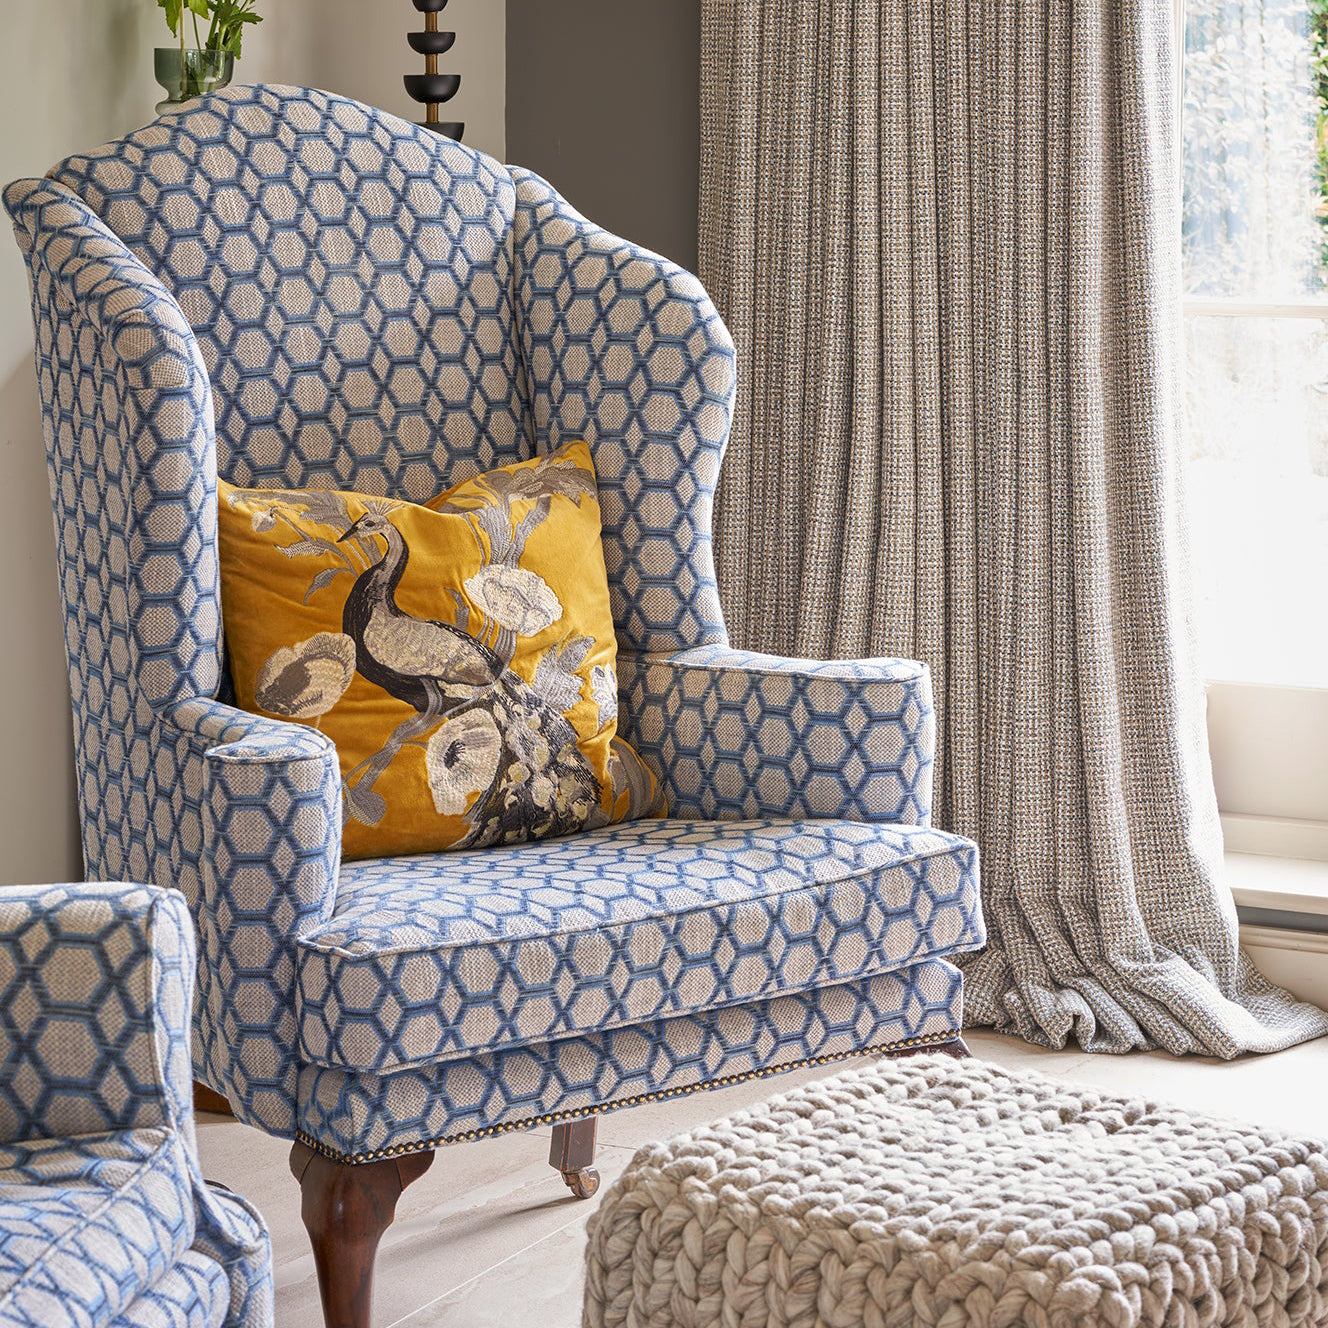 FINDING THE PERFECT WINDOW TREATMENT: A COMPREHENSIVE GUIDE